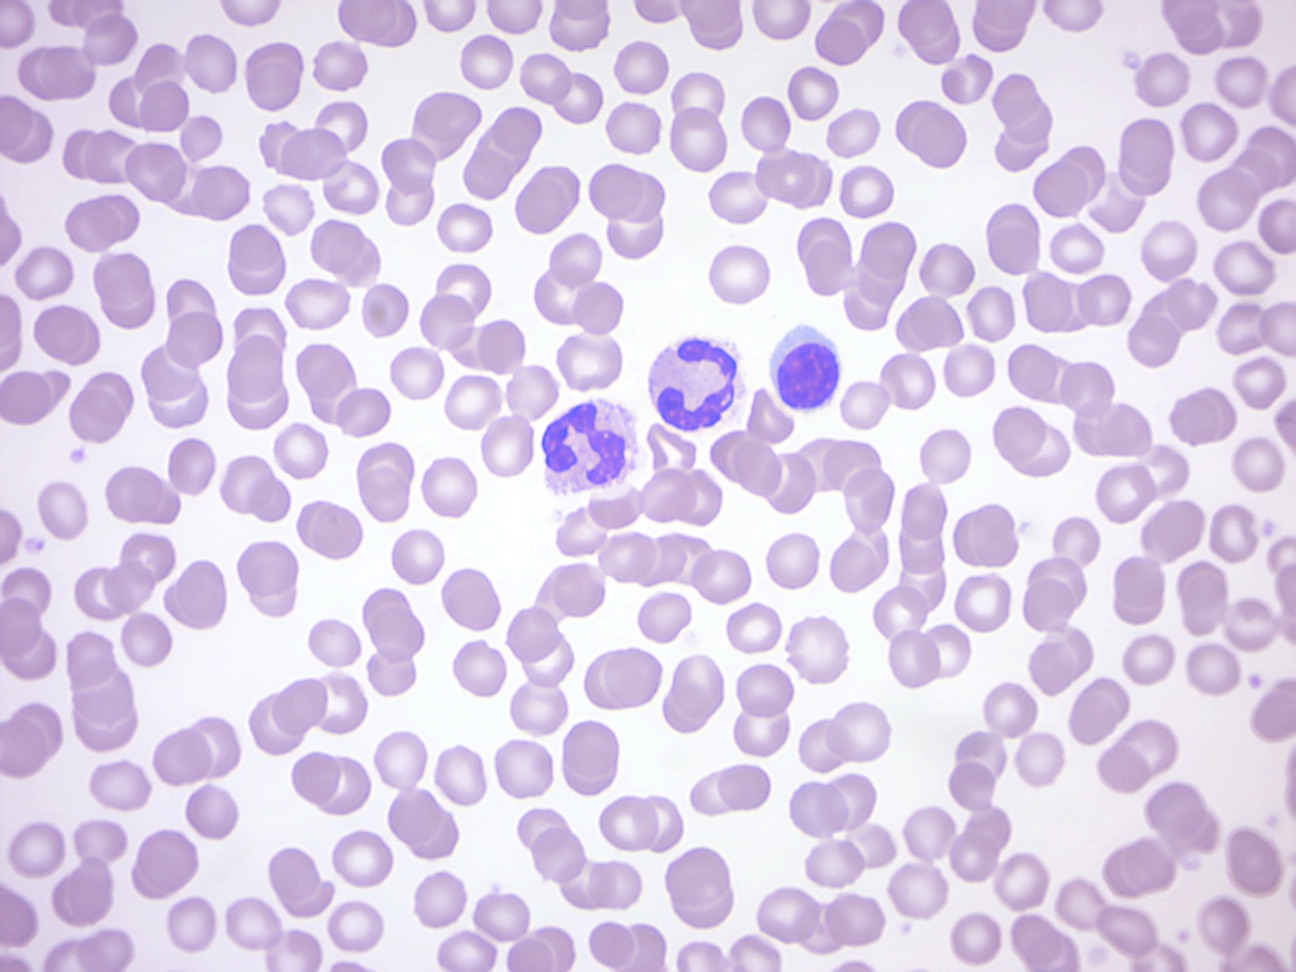 Human blood smear. Note red and two types of white blood cells.